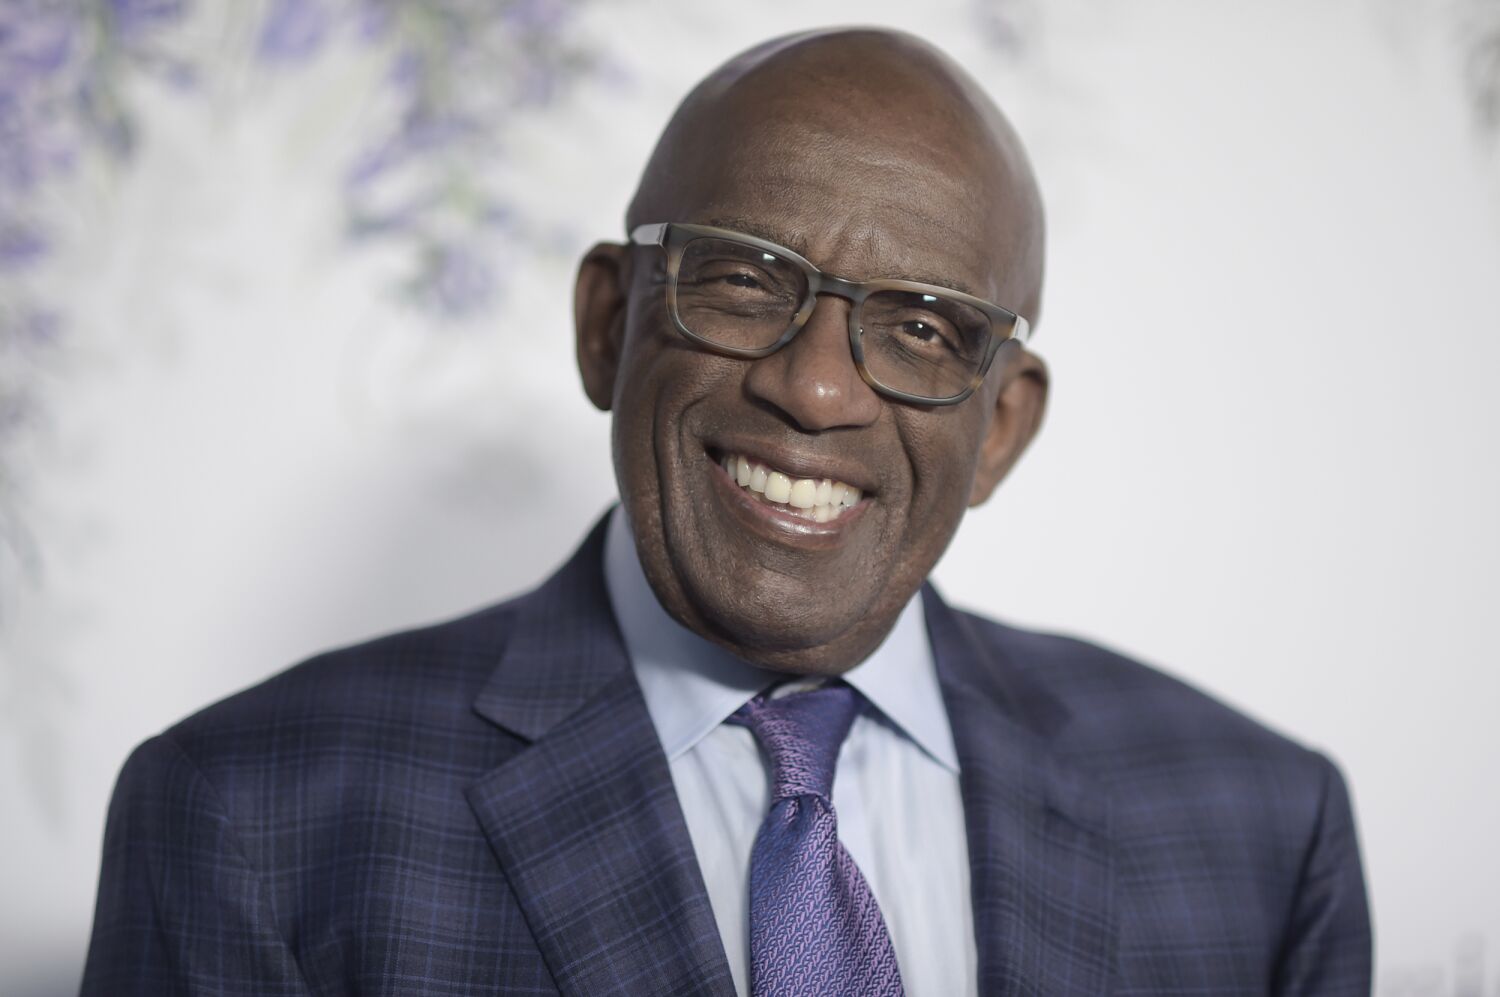 Al Roker on the mend after knee surgery. 'It was a bit of a bear,' he says on 'Today'